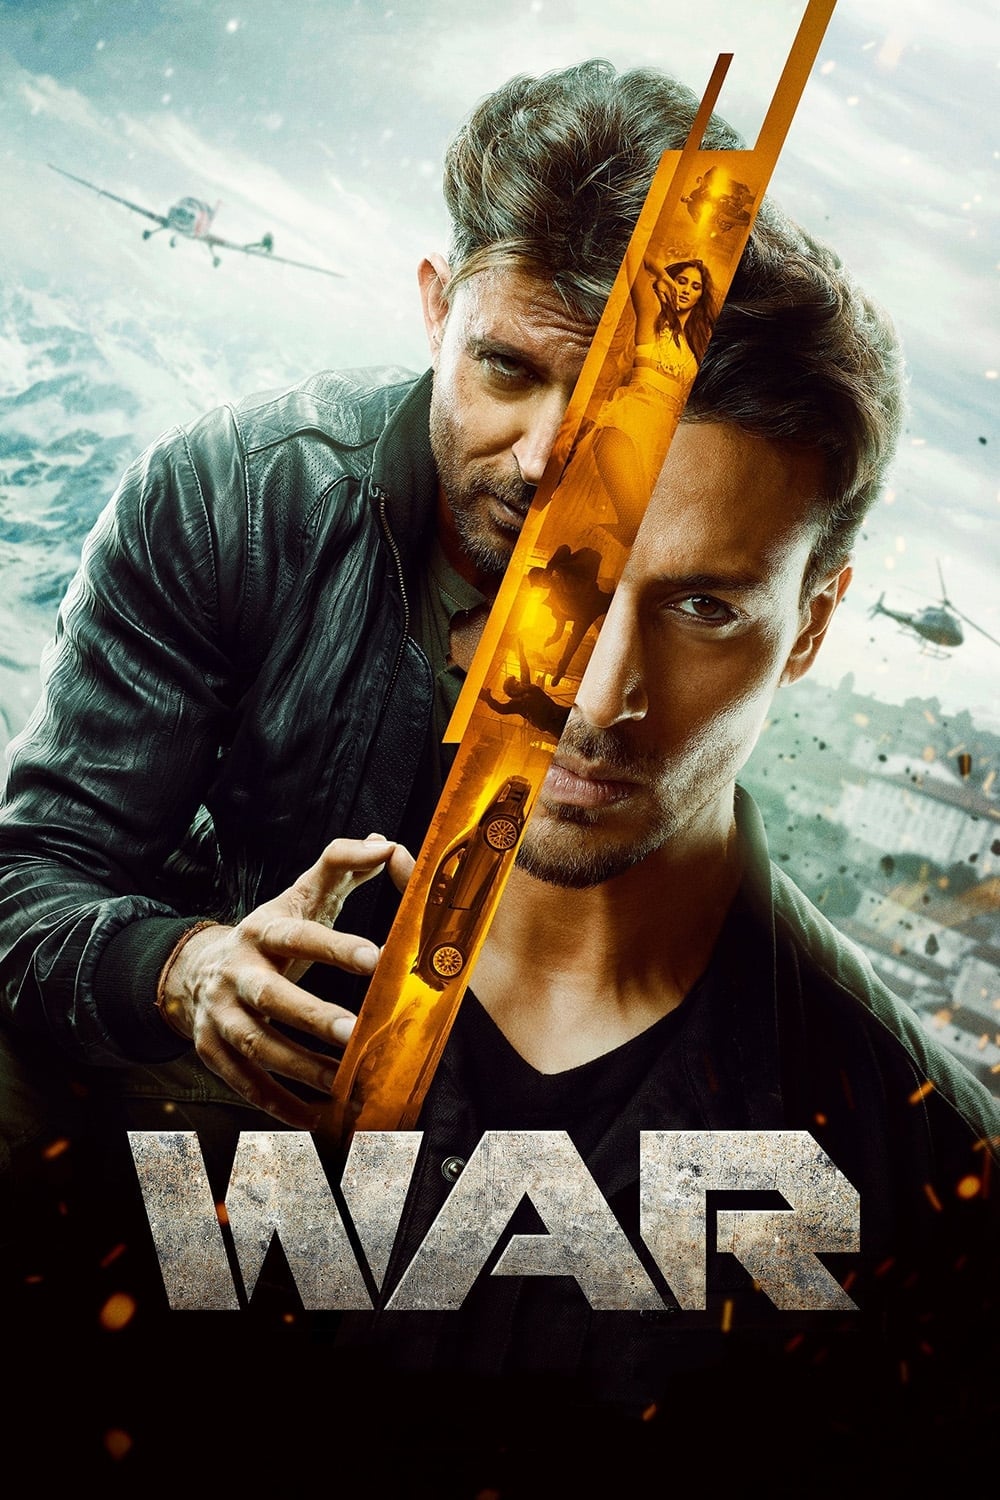 Poster for the movie "War"